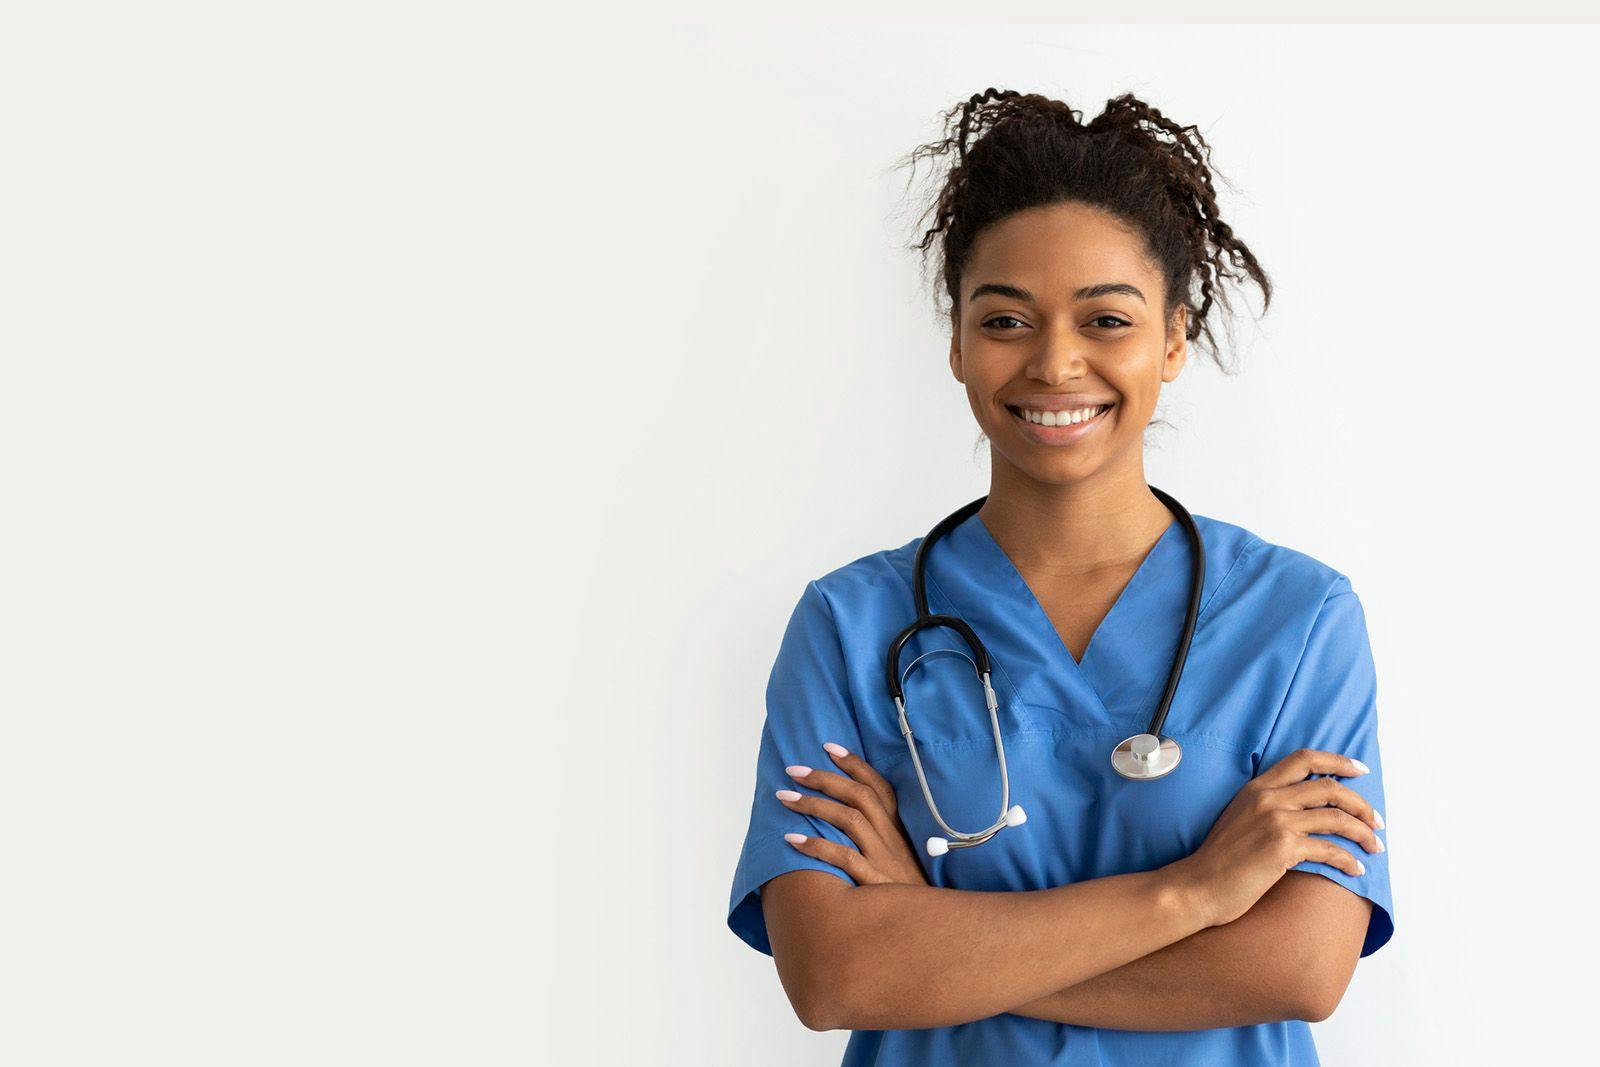 How Much Do Medical Assistants Earn?